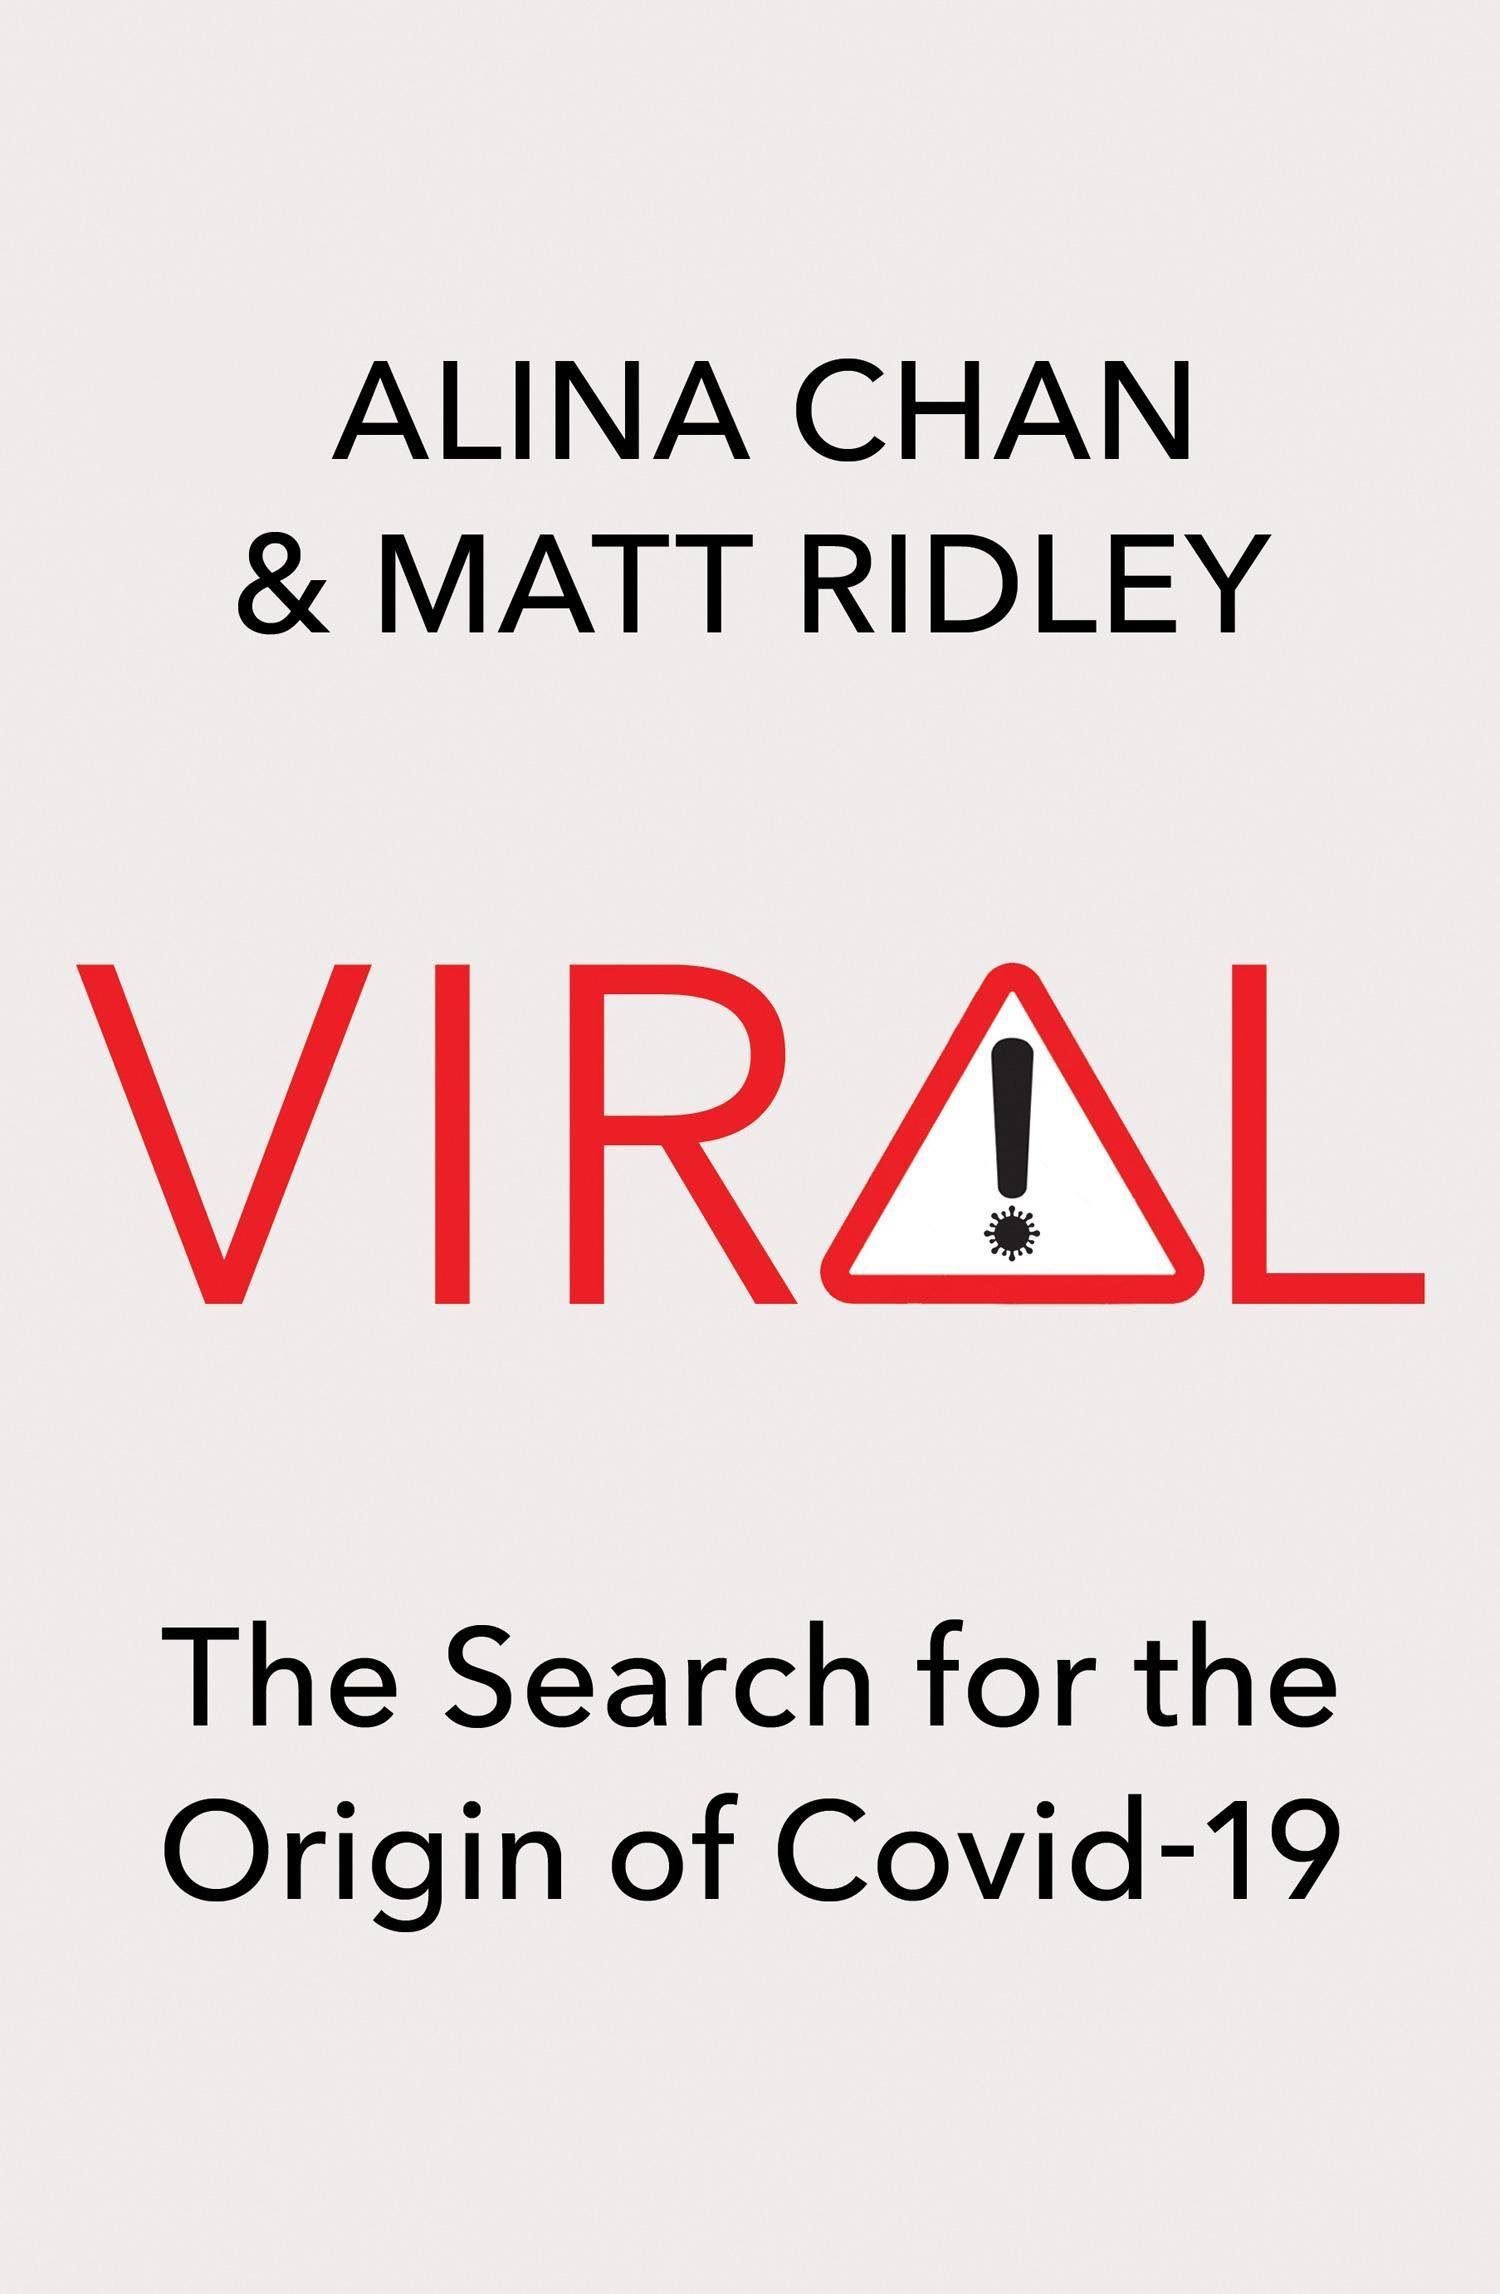 Viral: The Search for the Origin of Covid-19 [Book]